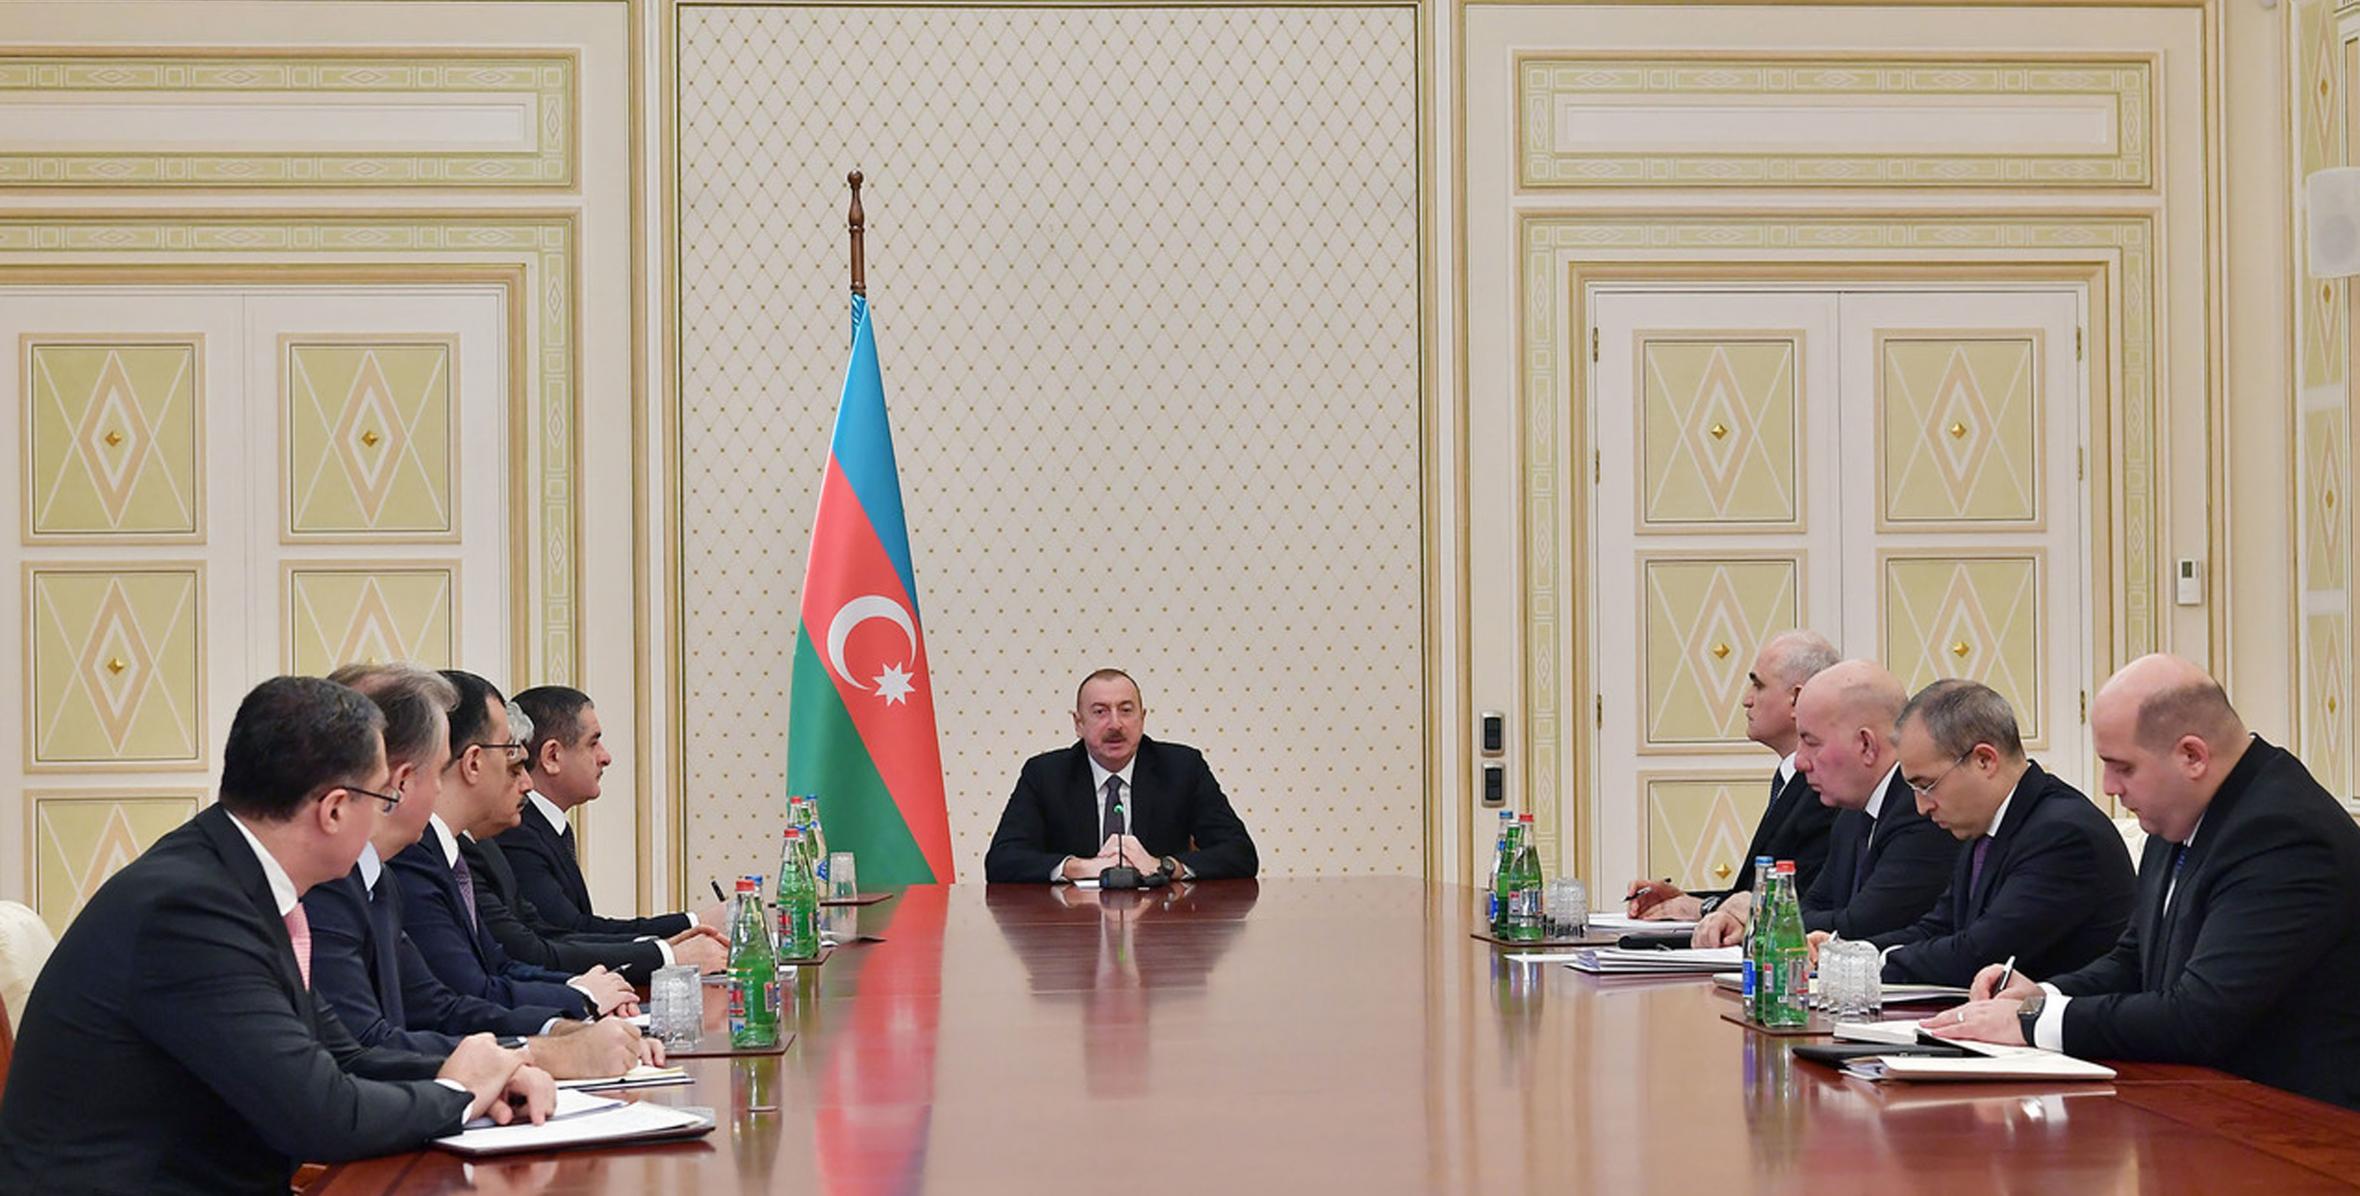 Speech by Ilham Aliyev at the meeting on economic and social issues under the President of Azerbaijan